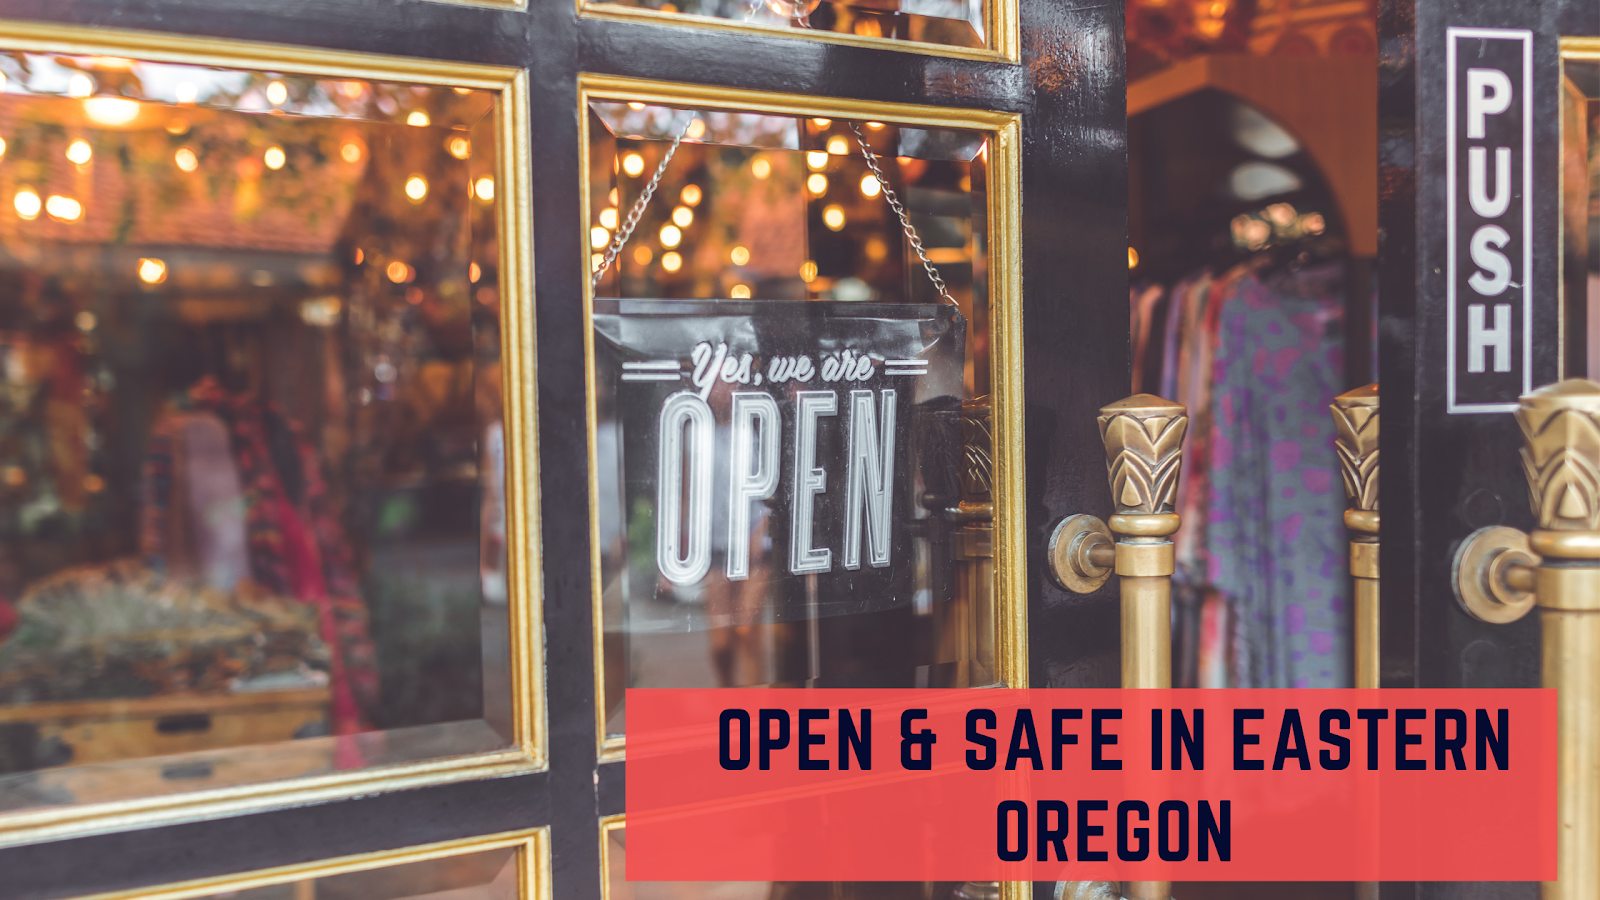 Rural Main Street Offers Safe & Affordable Options for Small Businesses Main Photo